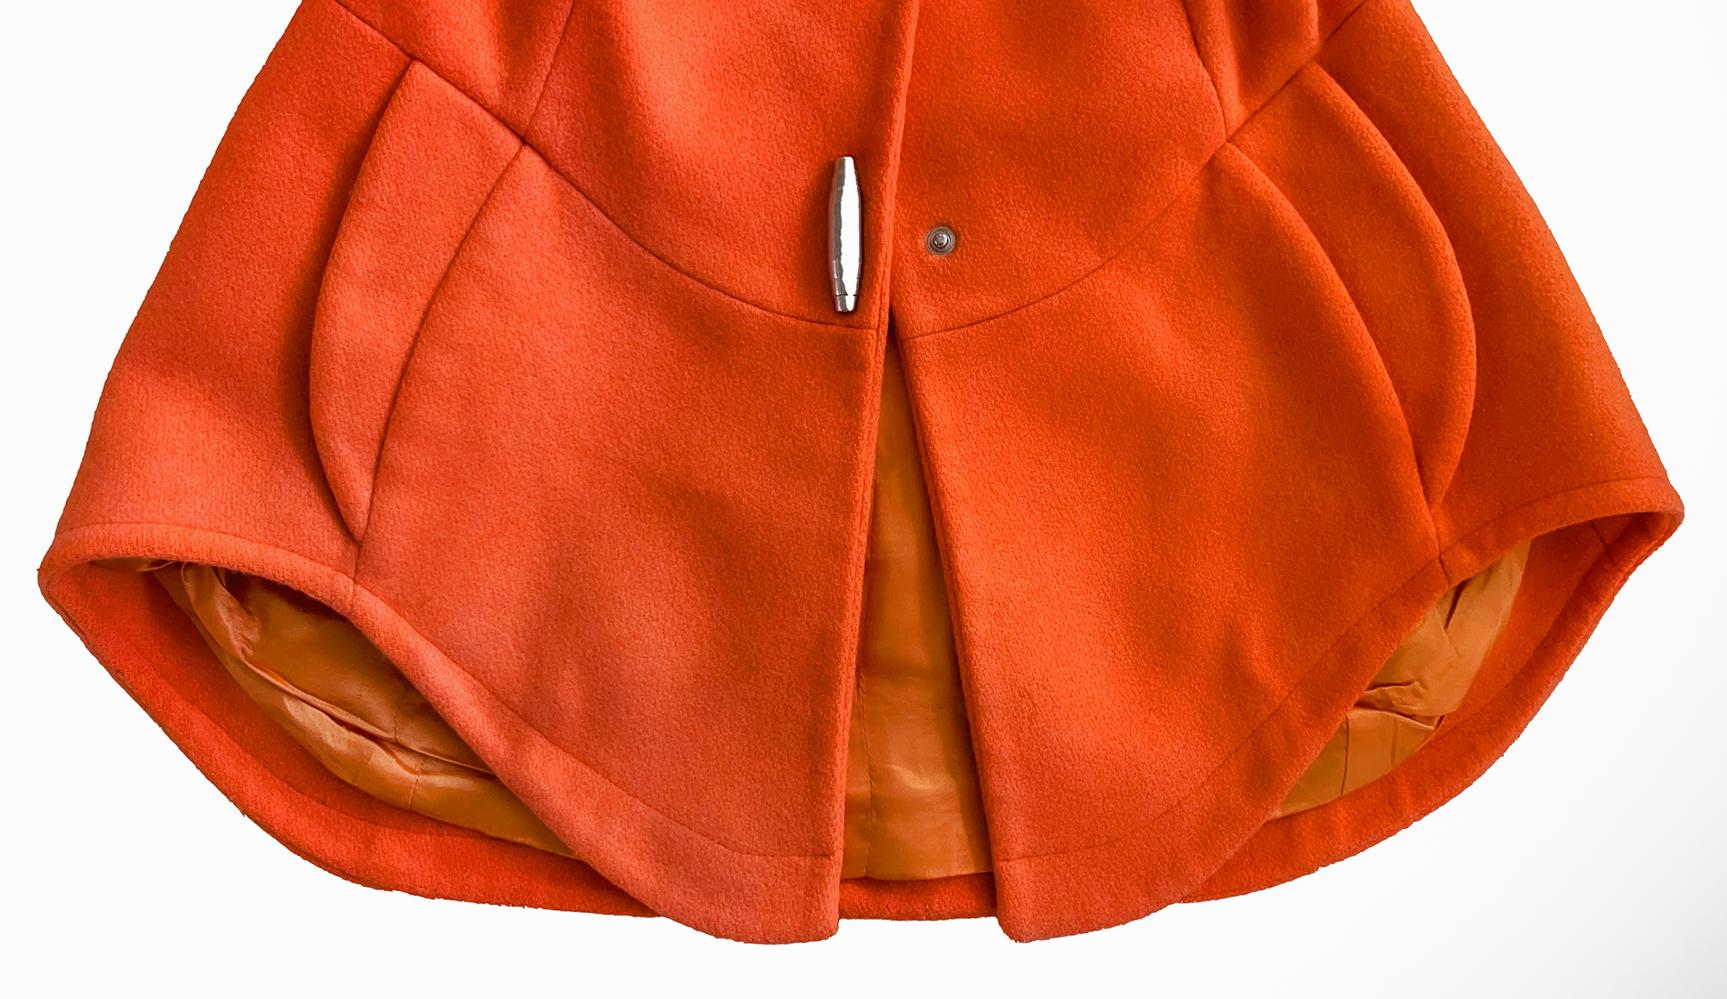 Thierry Mugler 1991 Documented Sculptural Orange Jacket with Metal Details For Sale 4